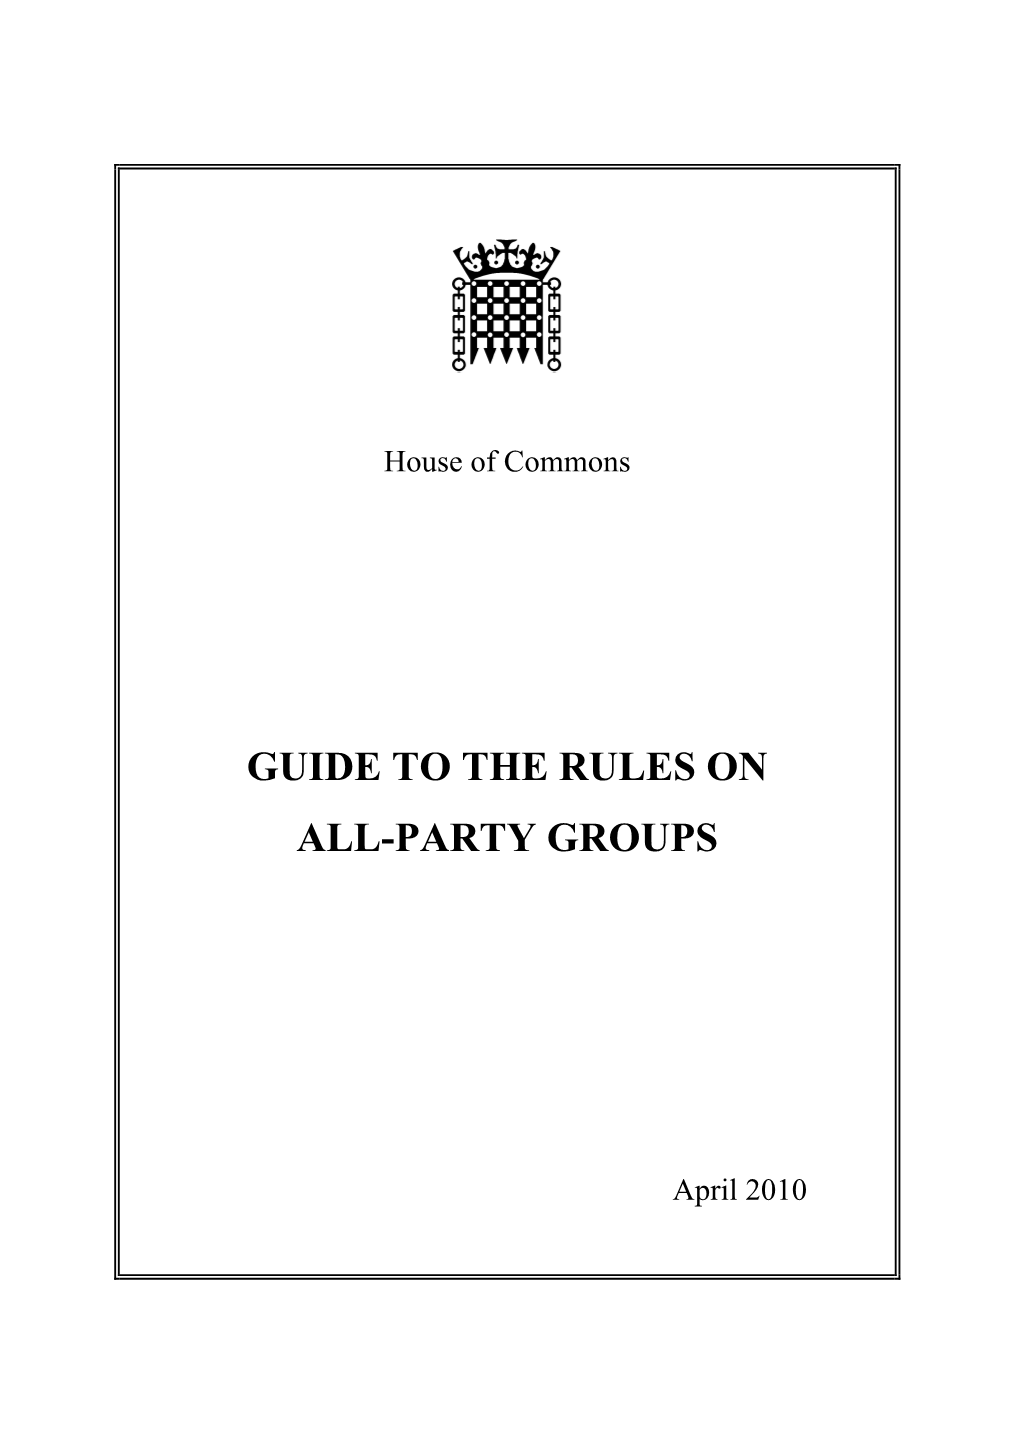 Guide to the Rules on All-Party Groups